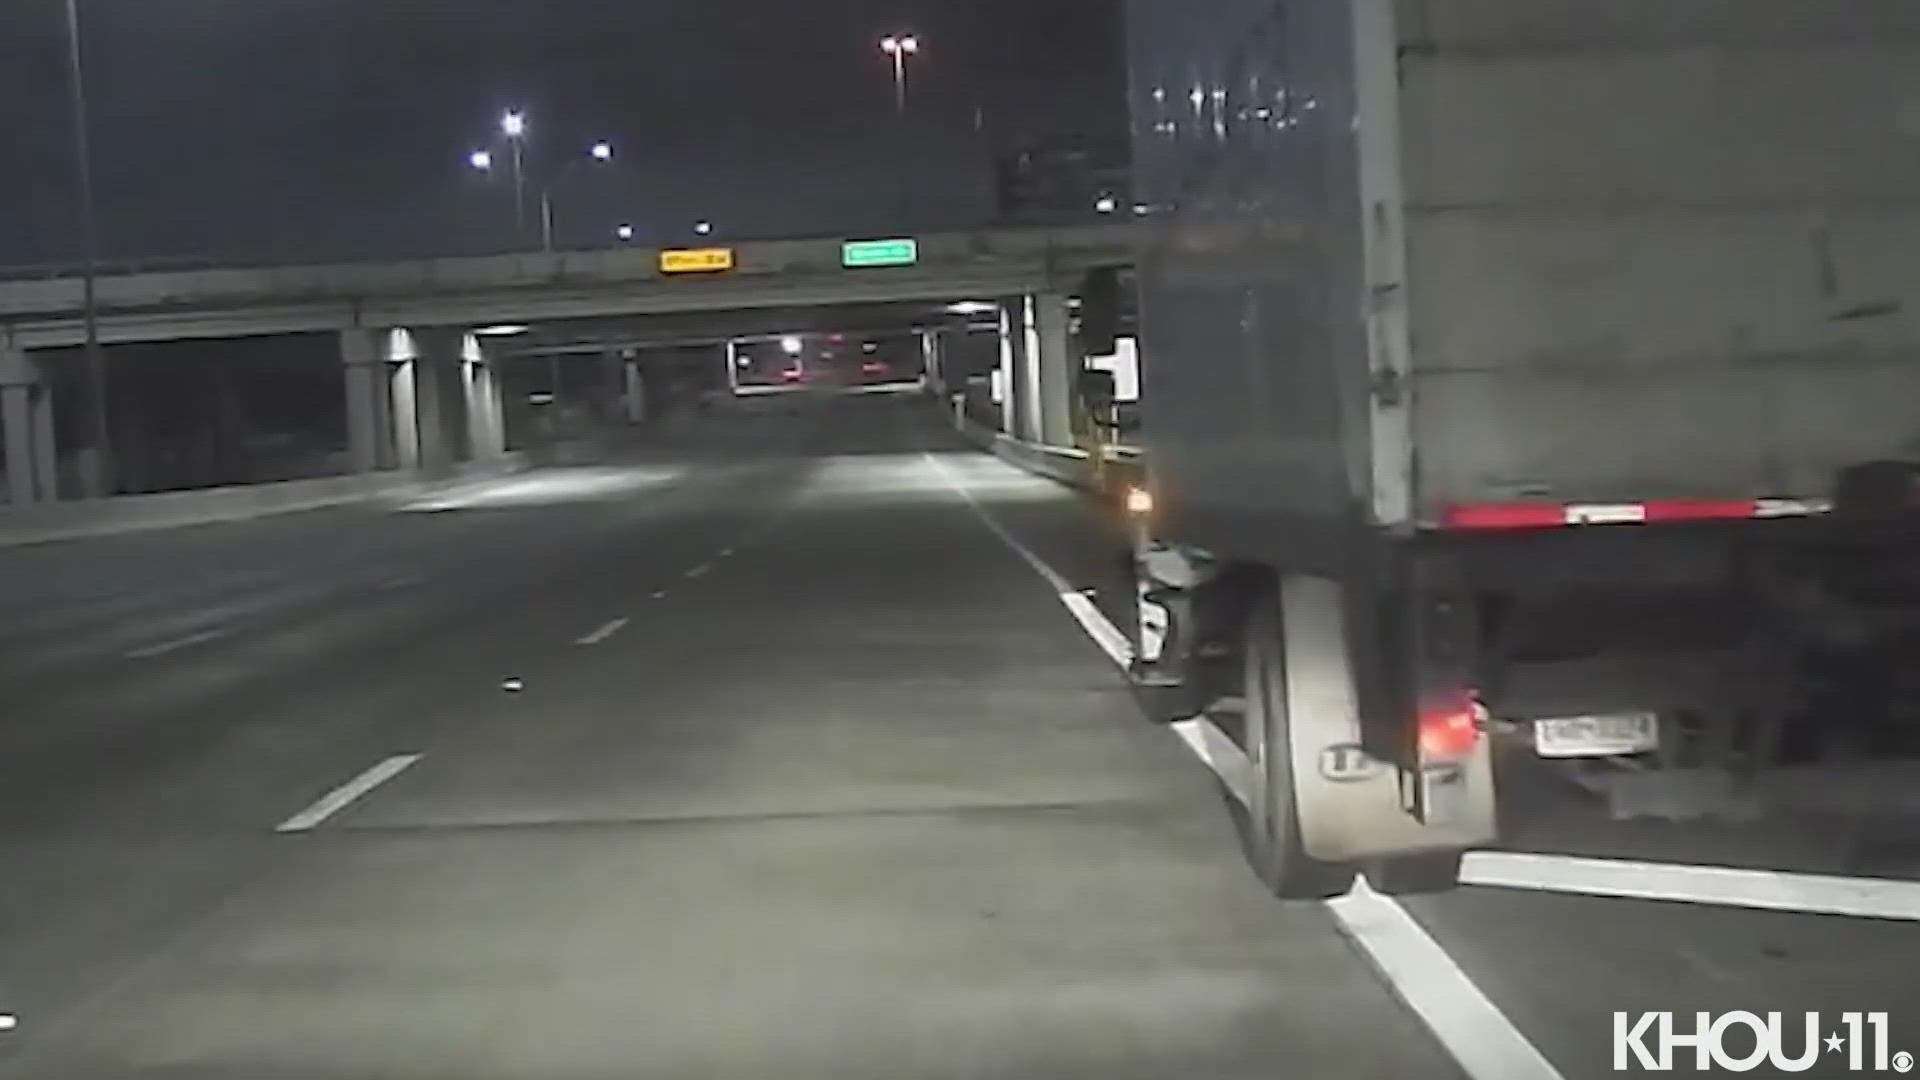 Harris County Precinct 5 released this video of a close call on Beltway 8. A deputy's patrol vehicle was sideswiped by a suspected intoxicated driver.